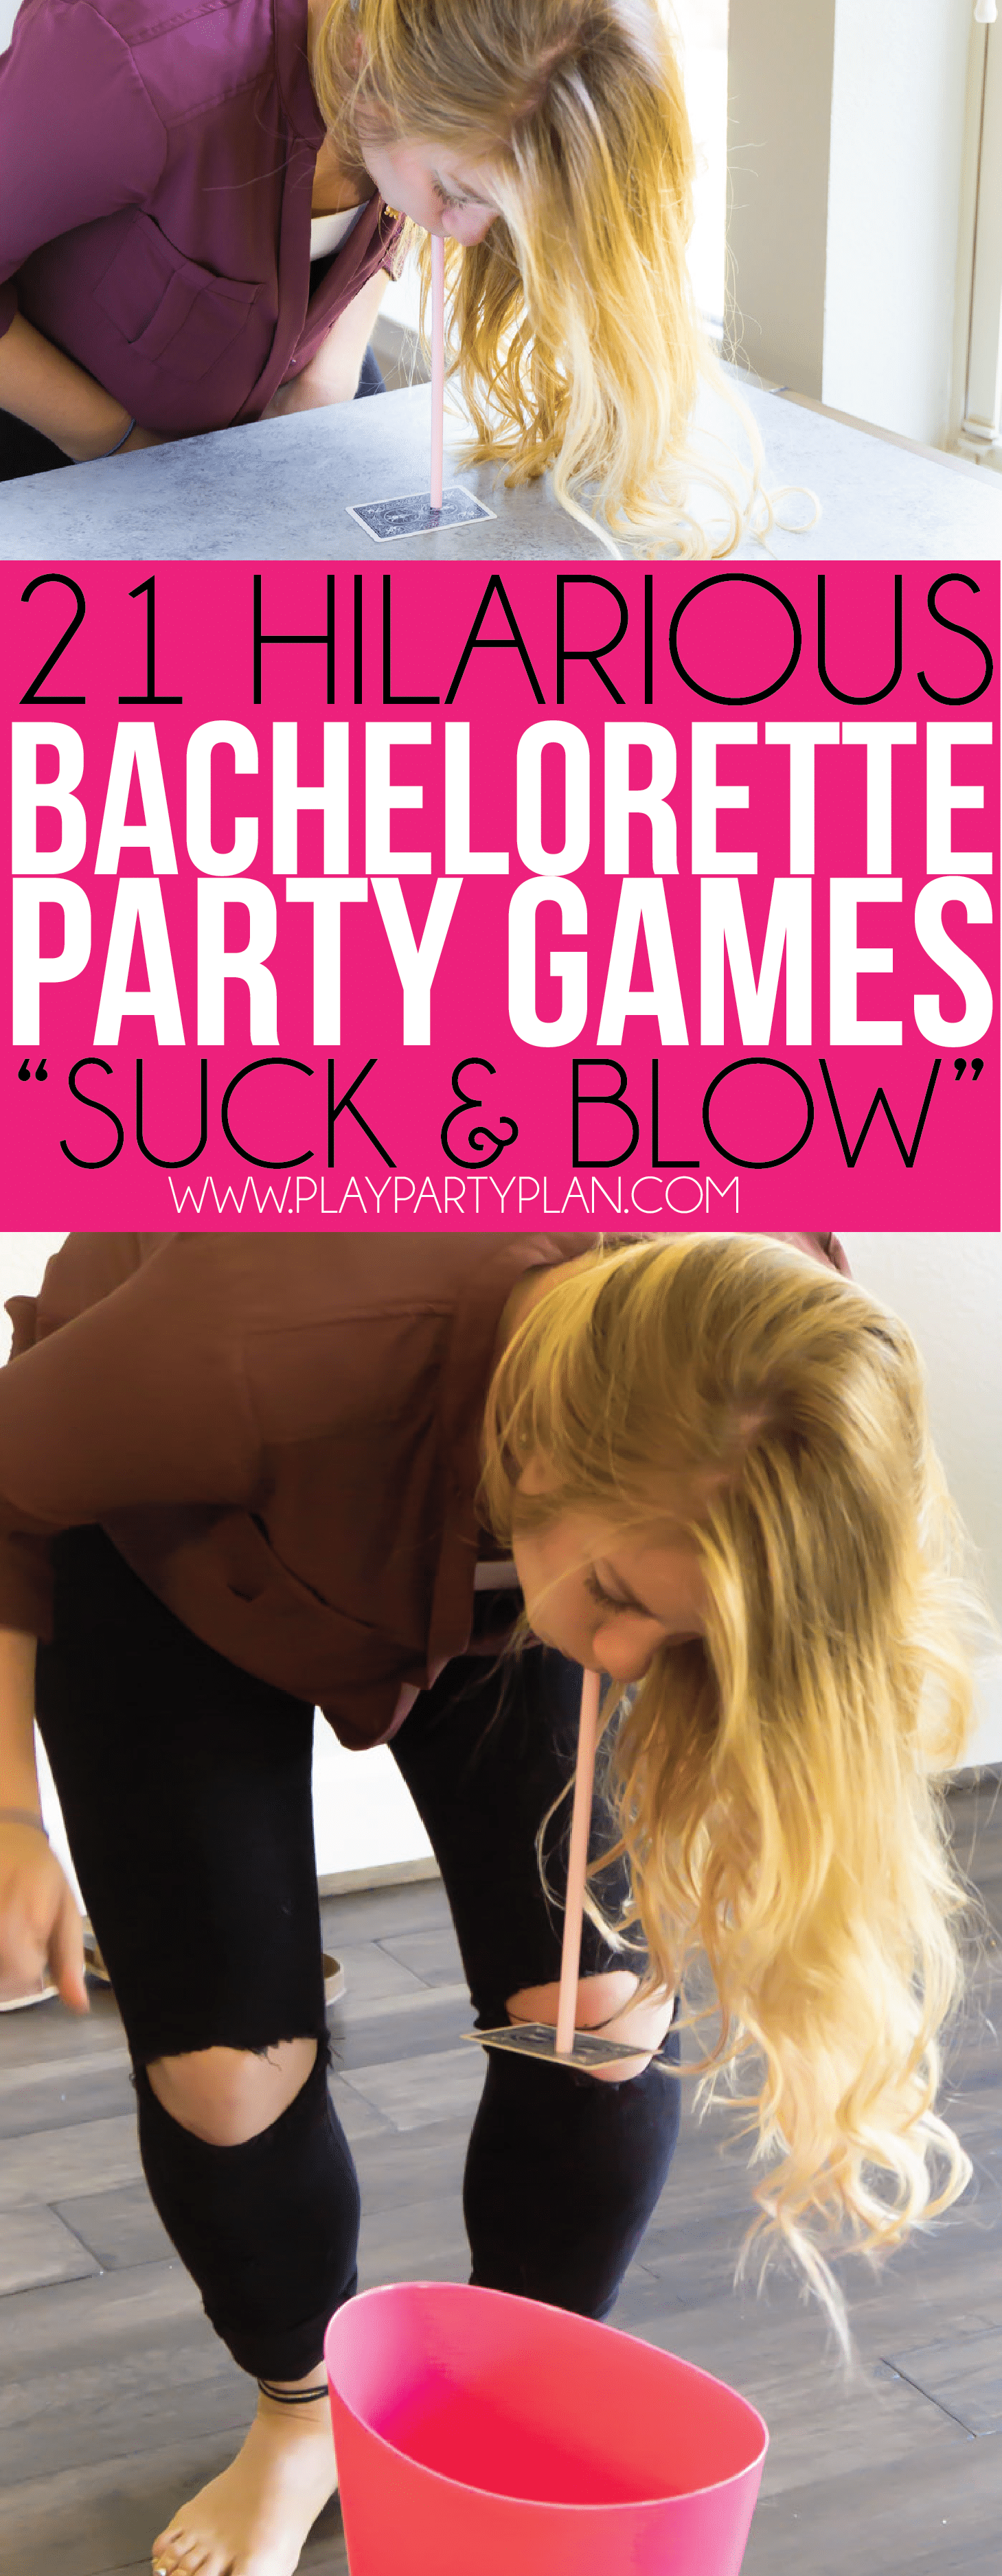 Try out this traditional suck and blow game when you need bachelorette party games